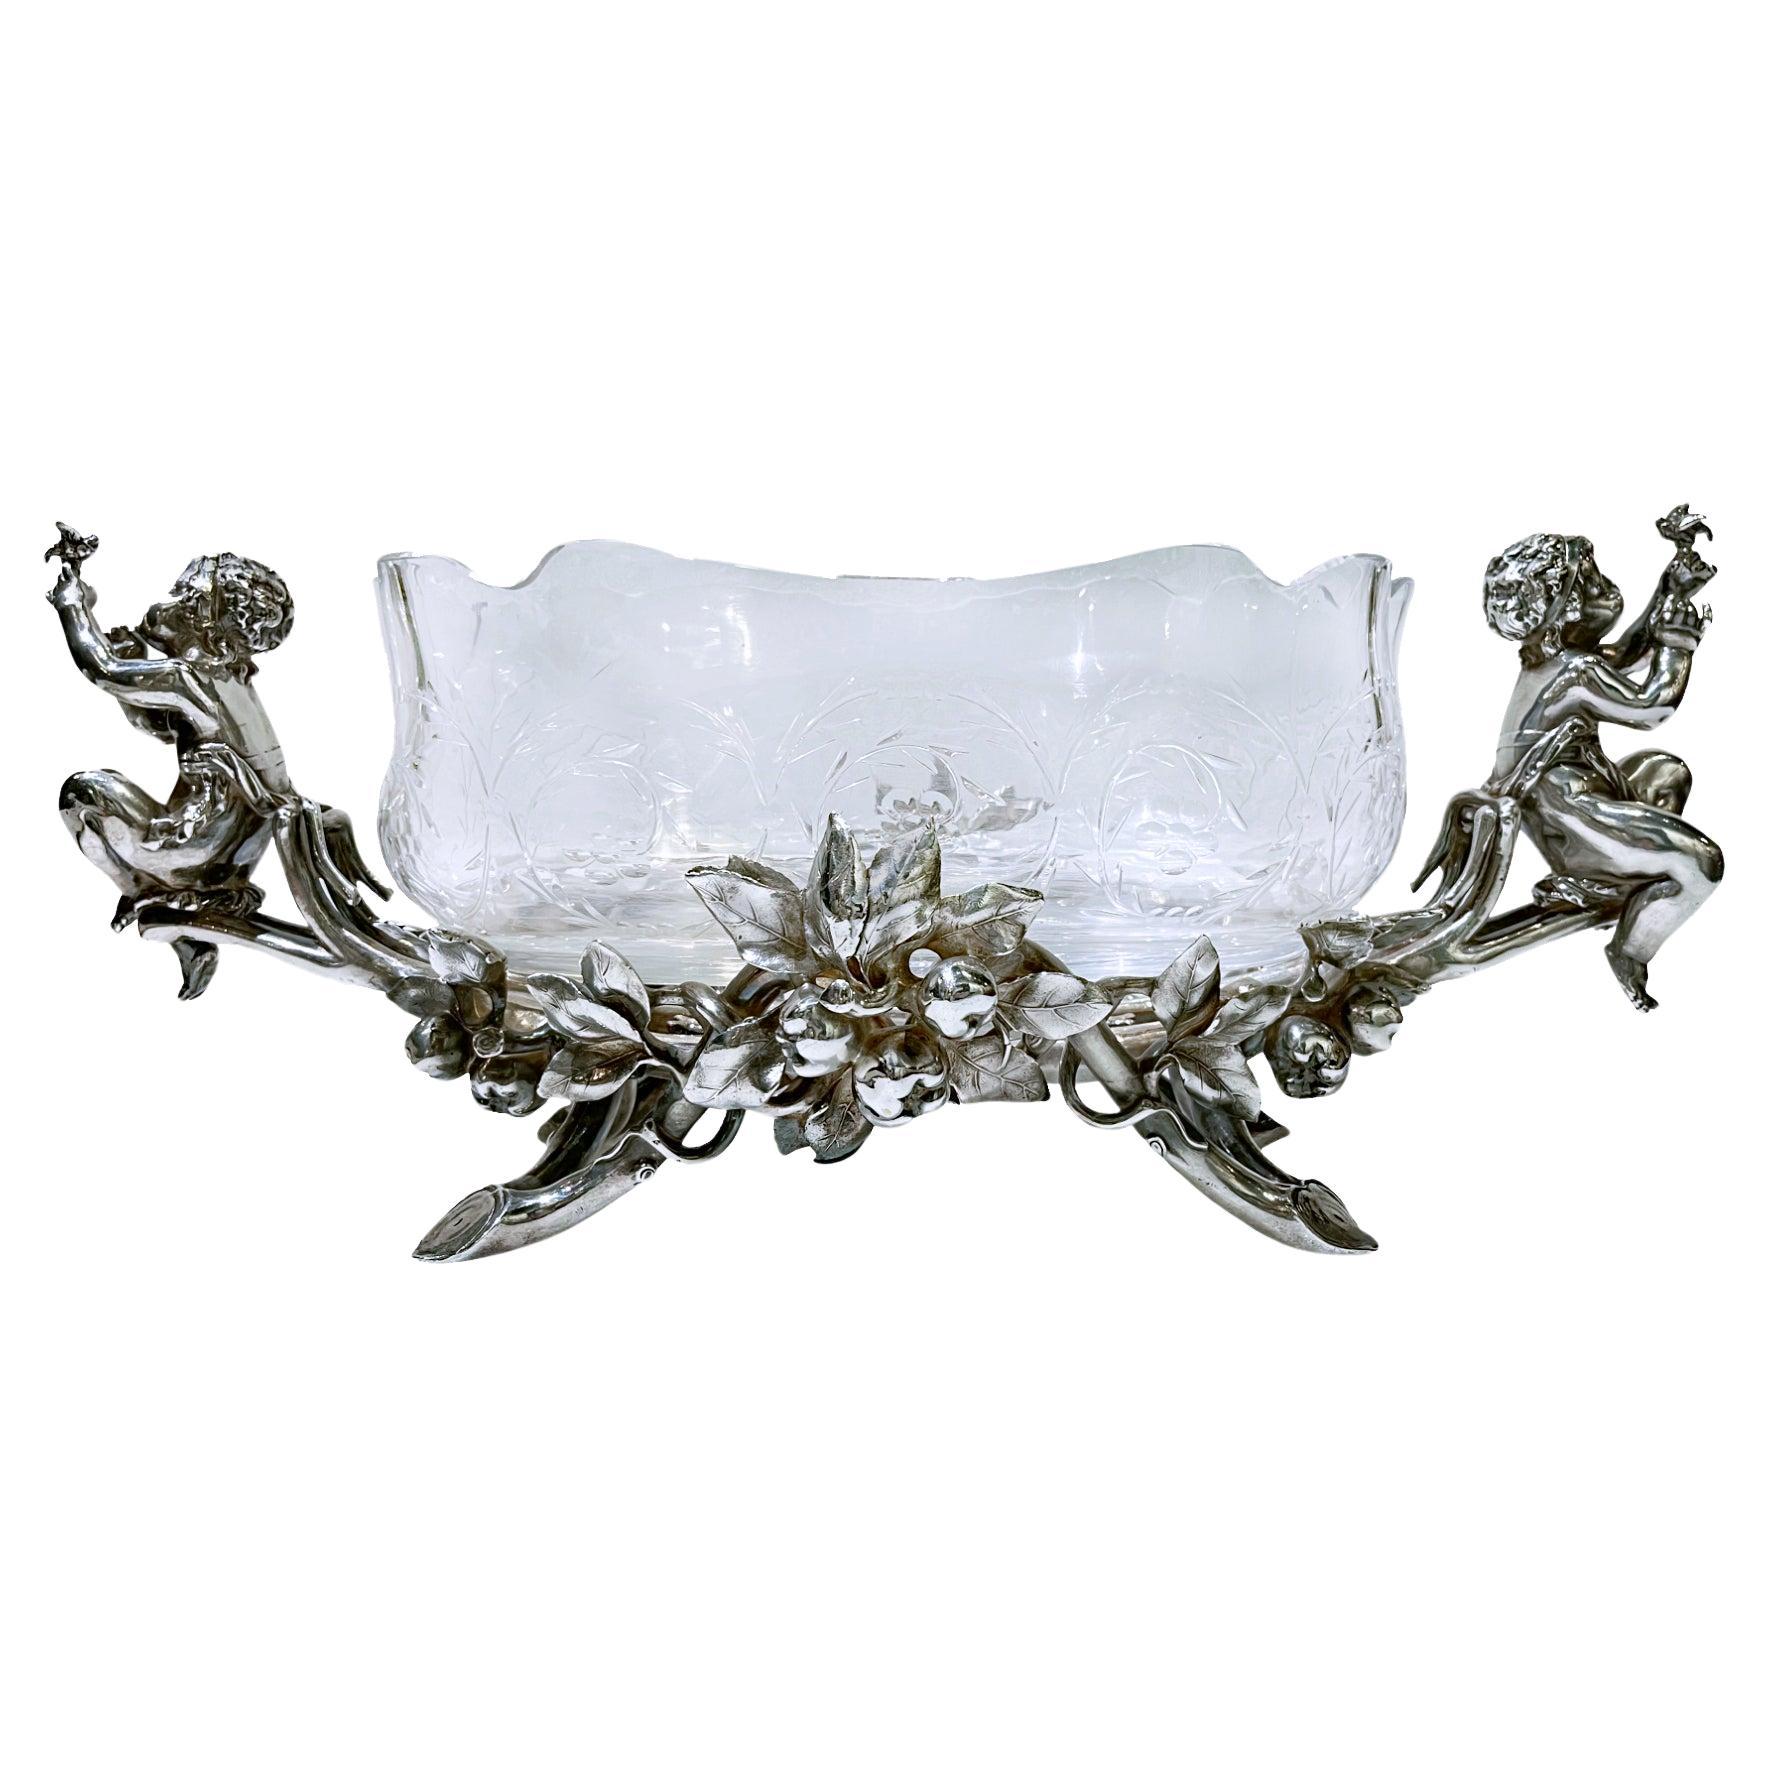 Celestial Christofle Crystal Centerpiece Bowl On Fitted Silver Stand For Sale